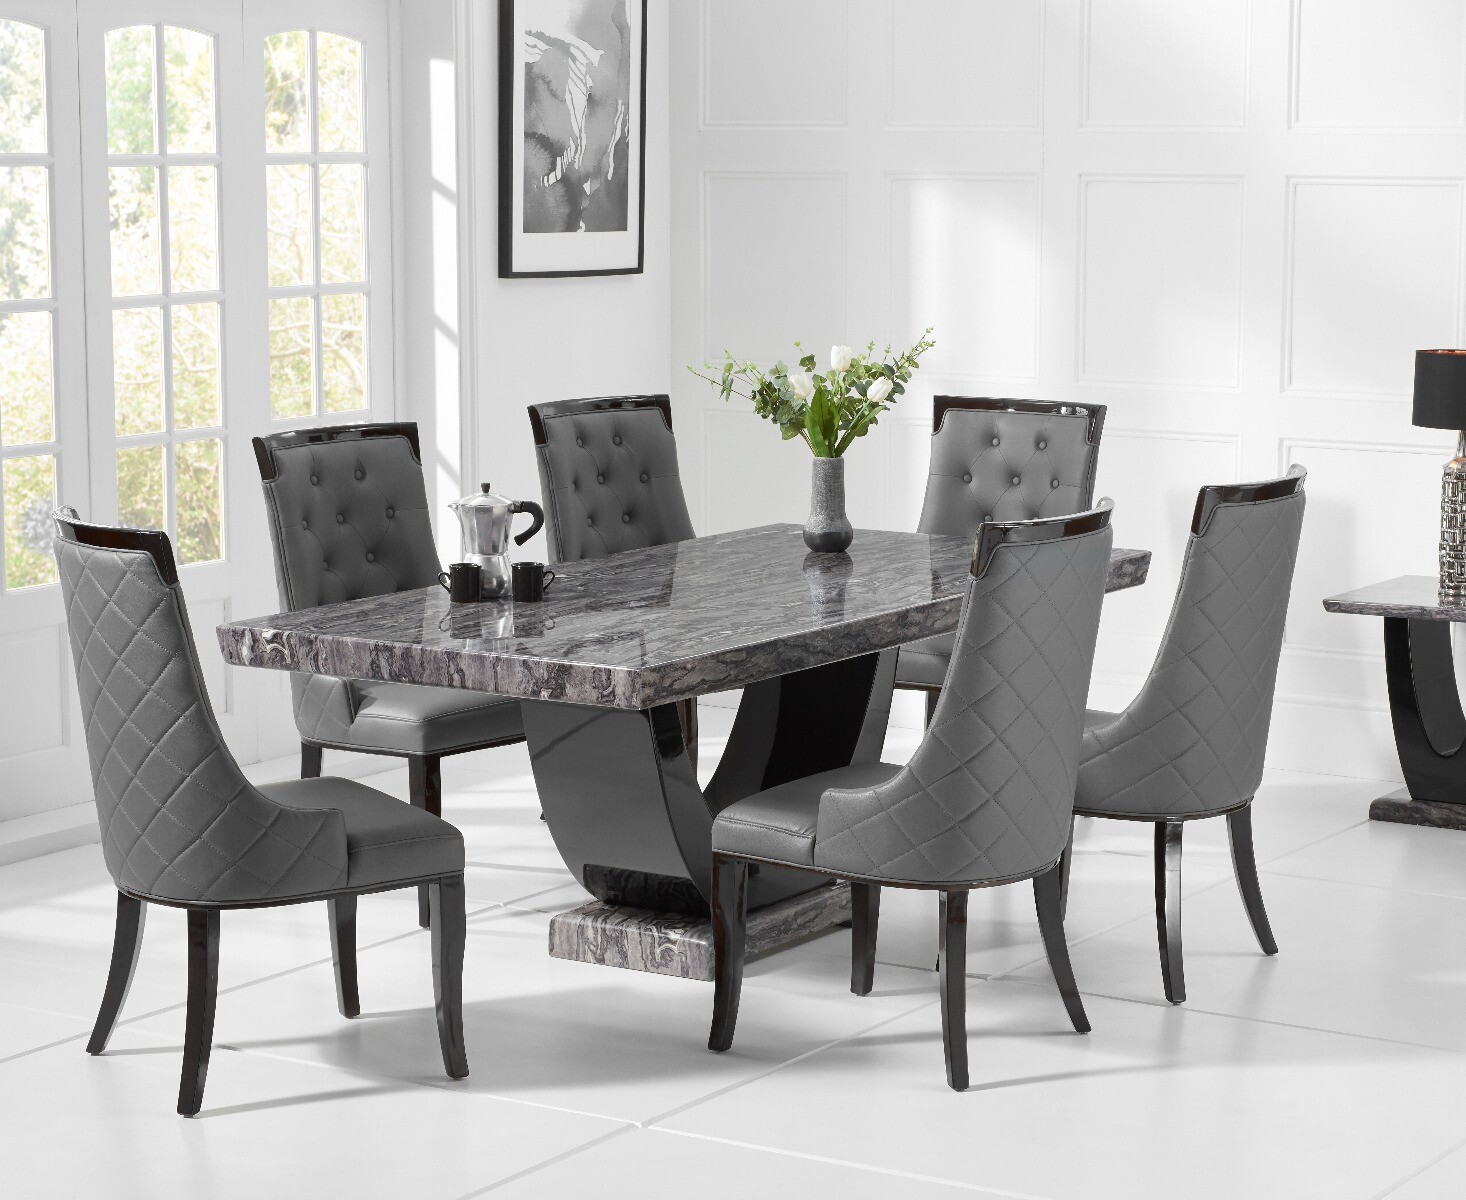 Photo 2 of Raphael 200cm dark grey pedestal marble dining table with 10 grey francesca chairs